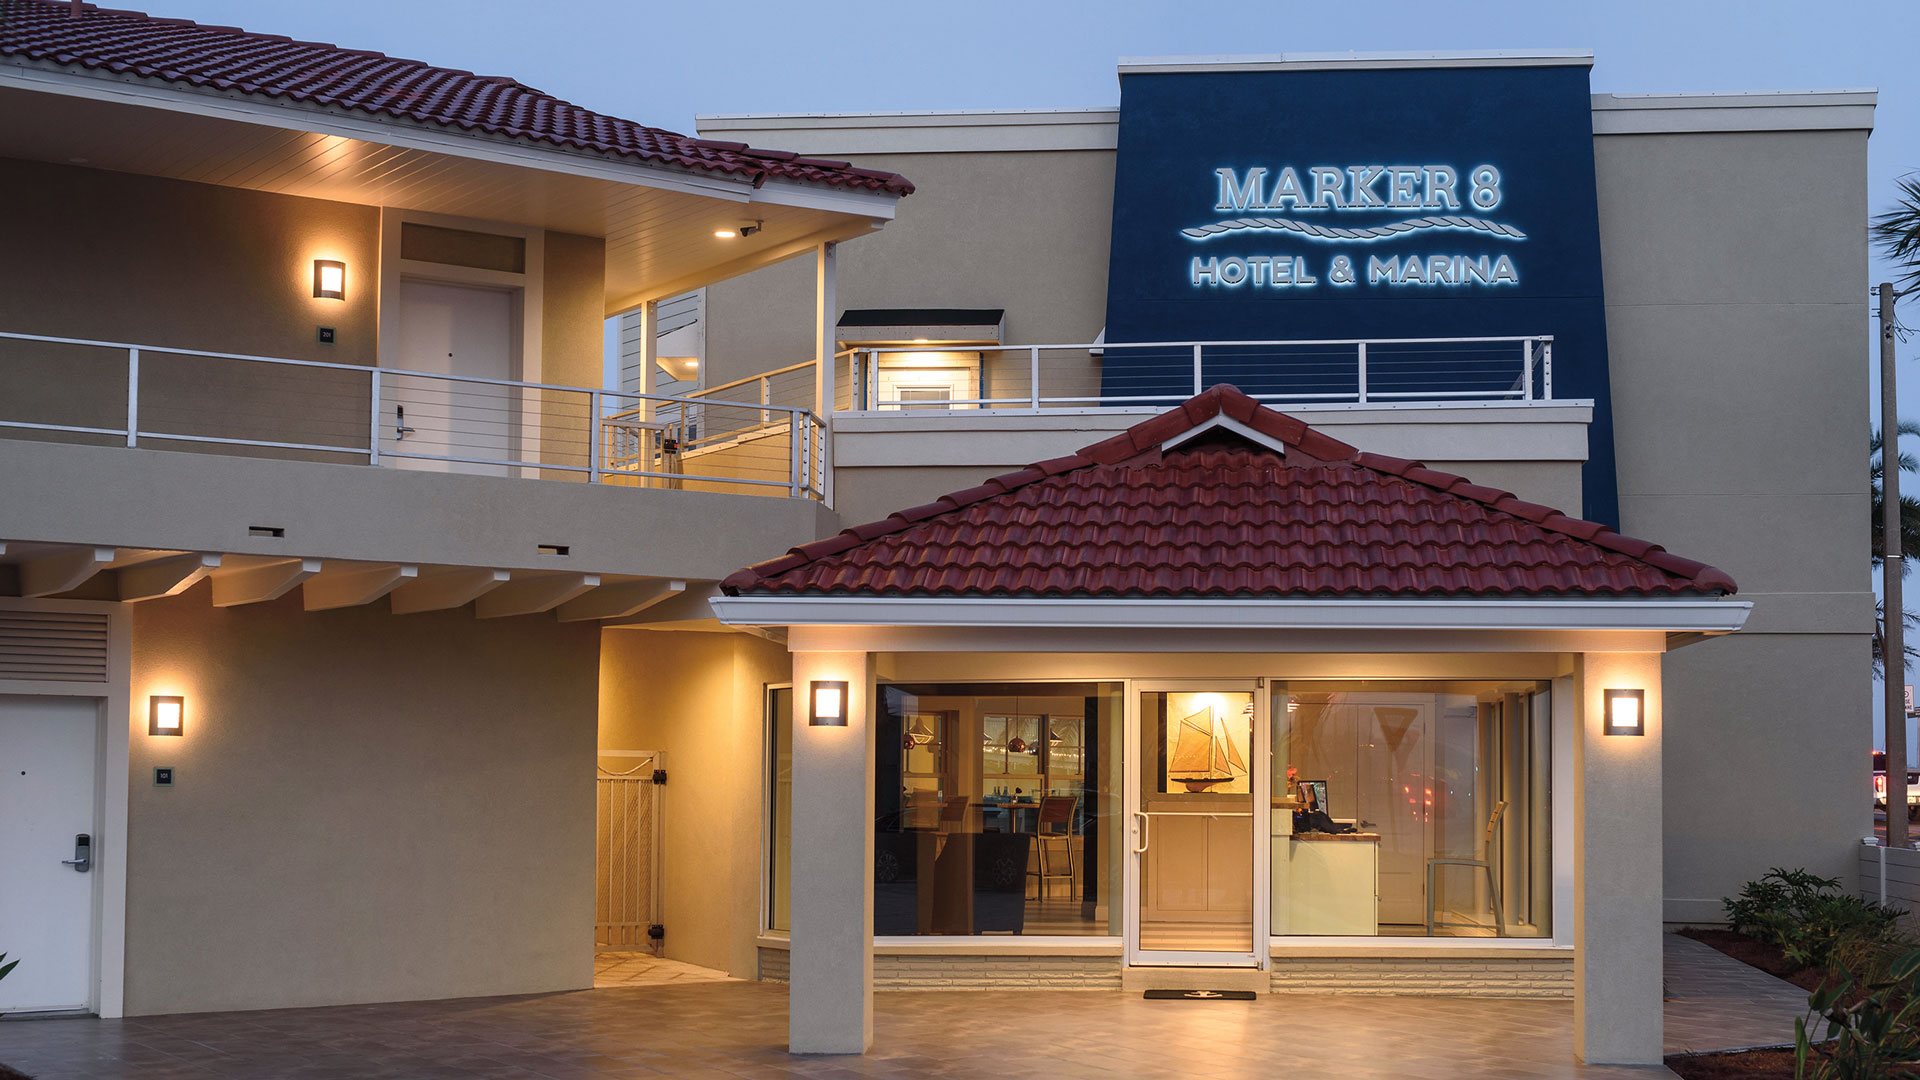 Marker 8 Hotel and Marina in St. Augustine, Florida